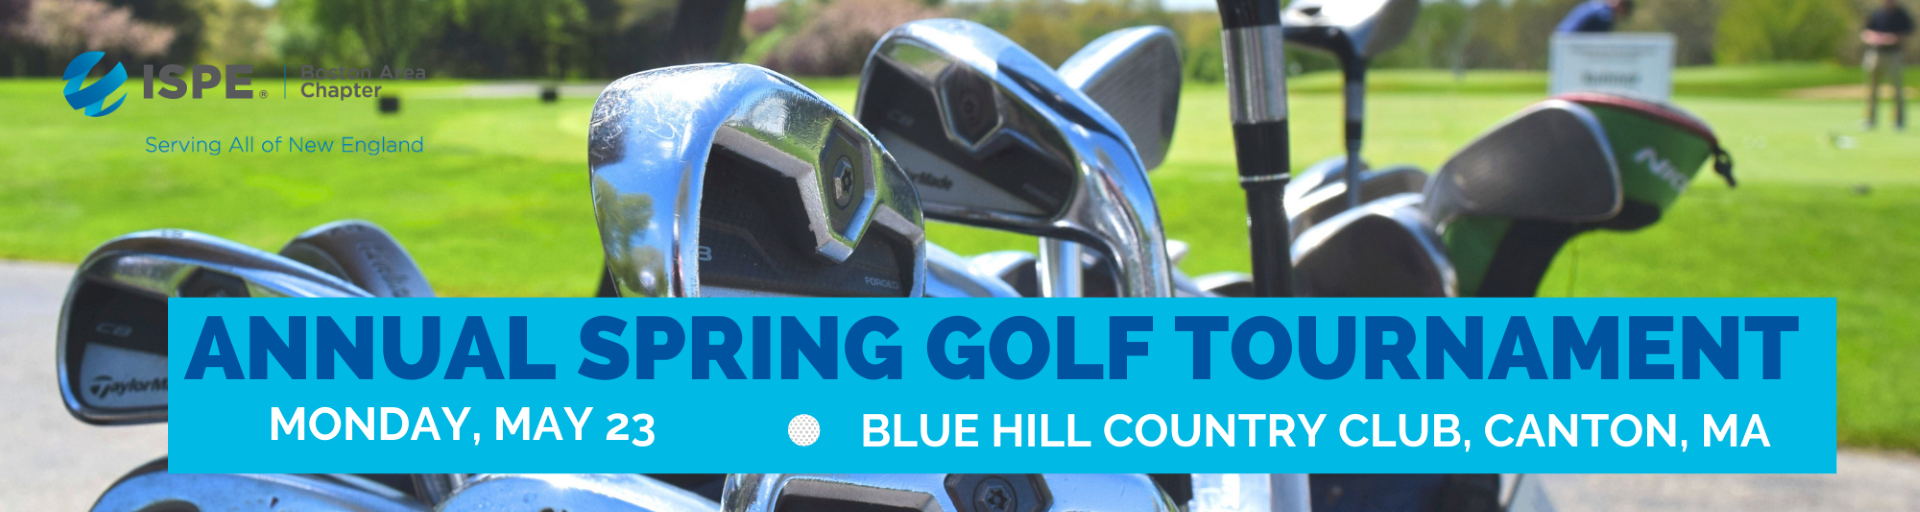 ISPE Spring Golf Tournament @ Blue Hill Country Club